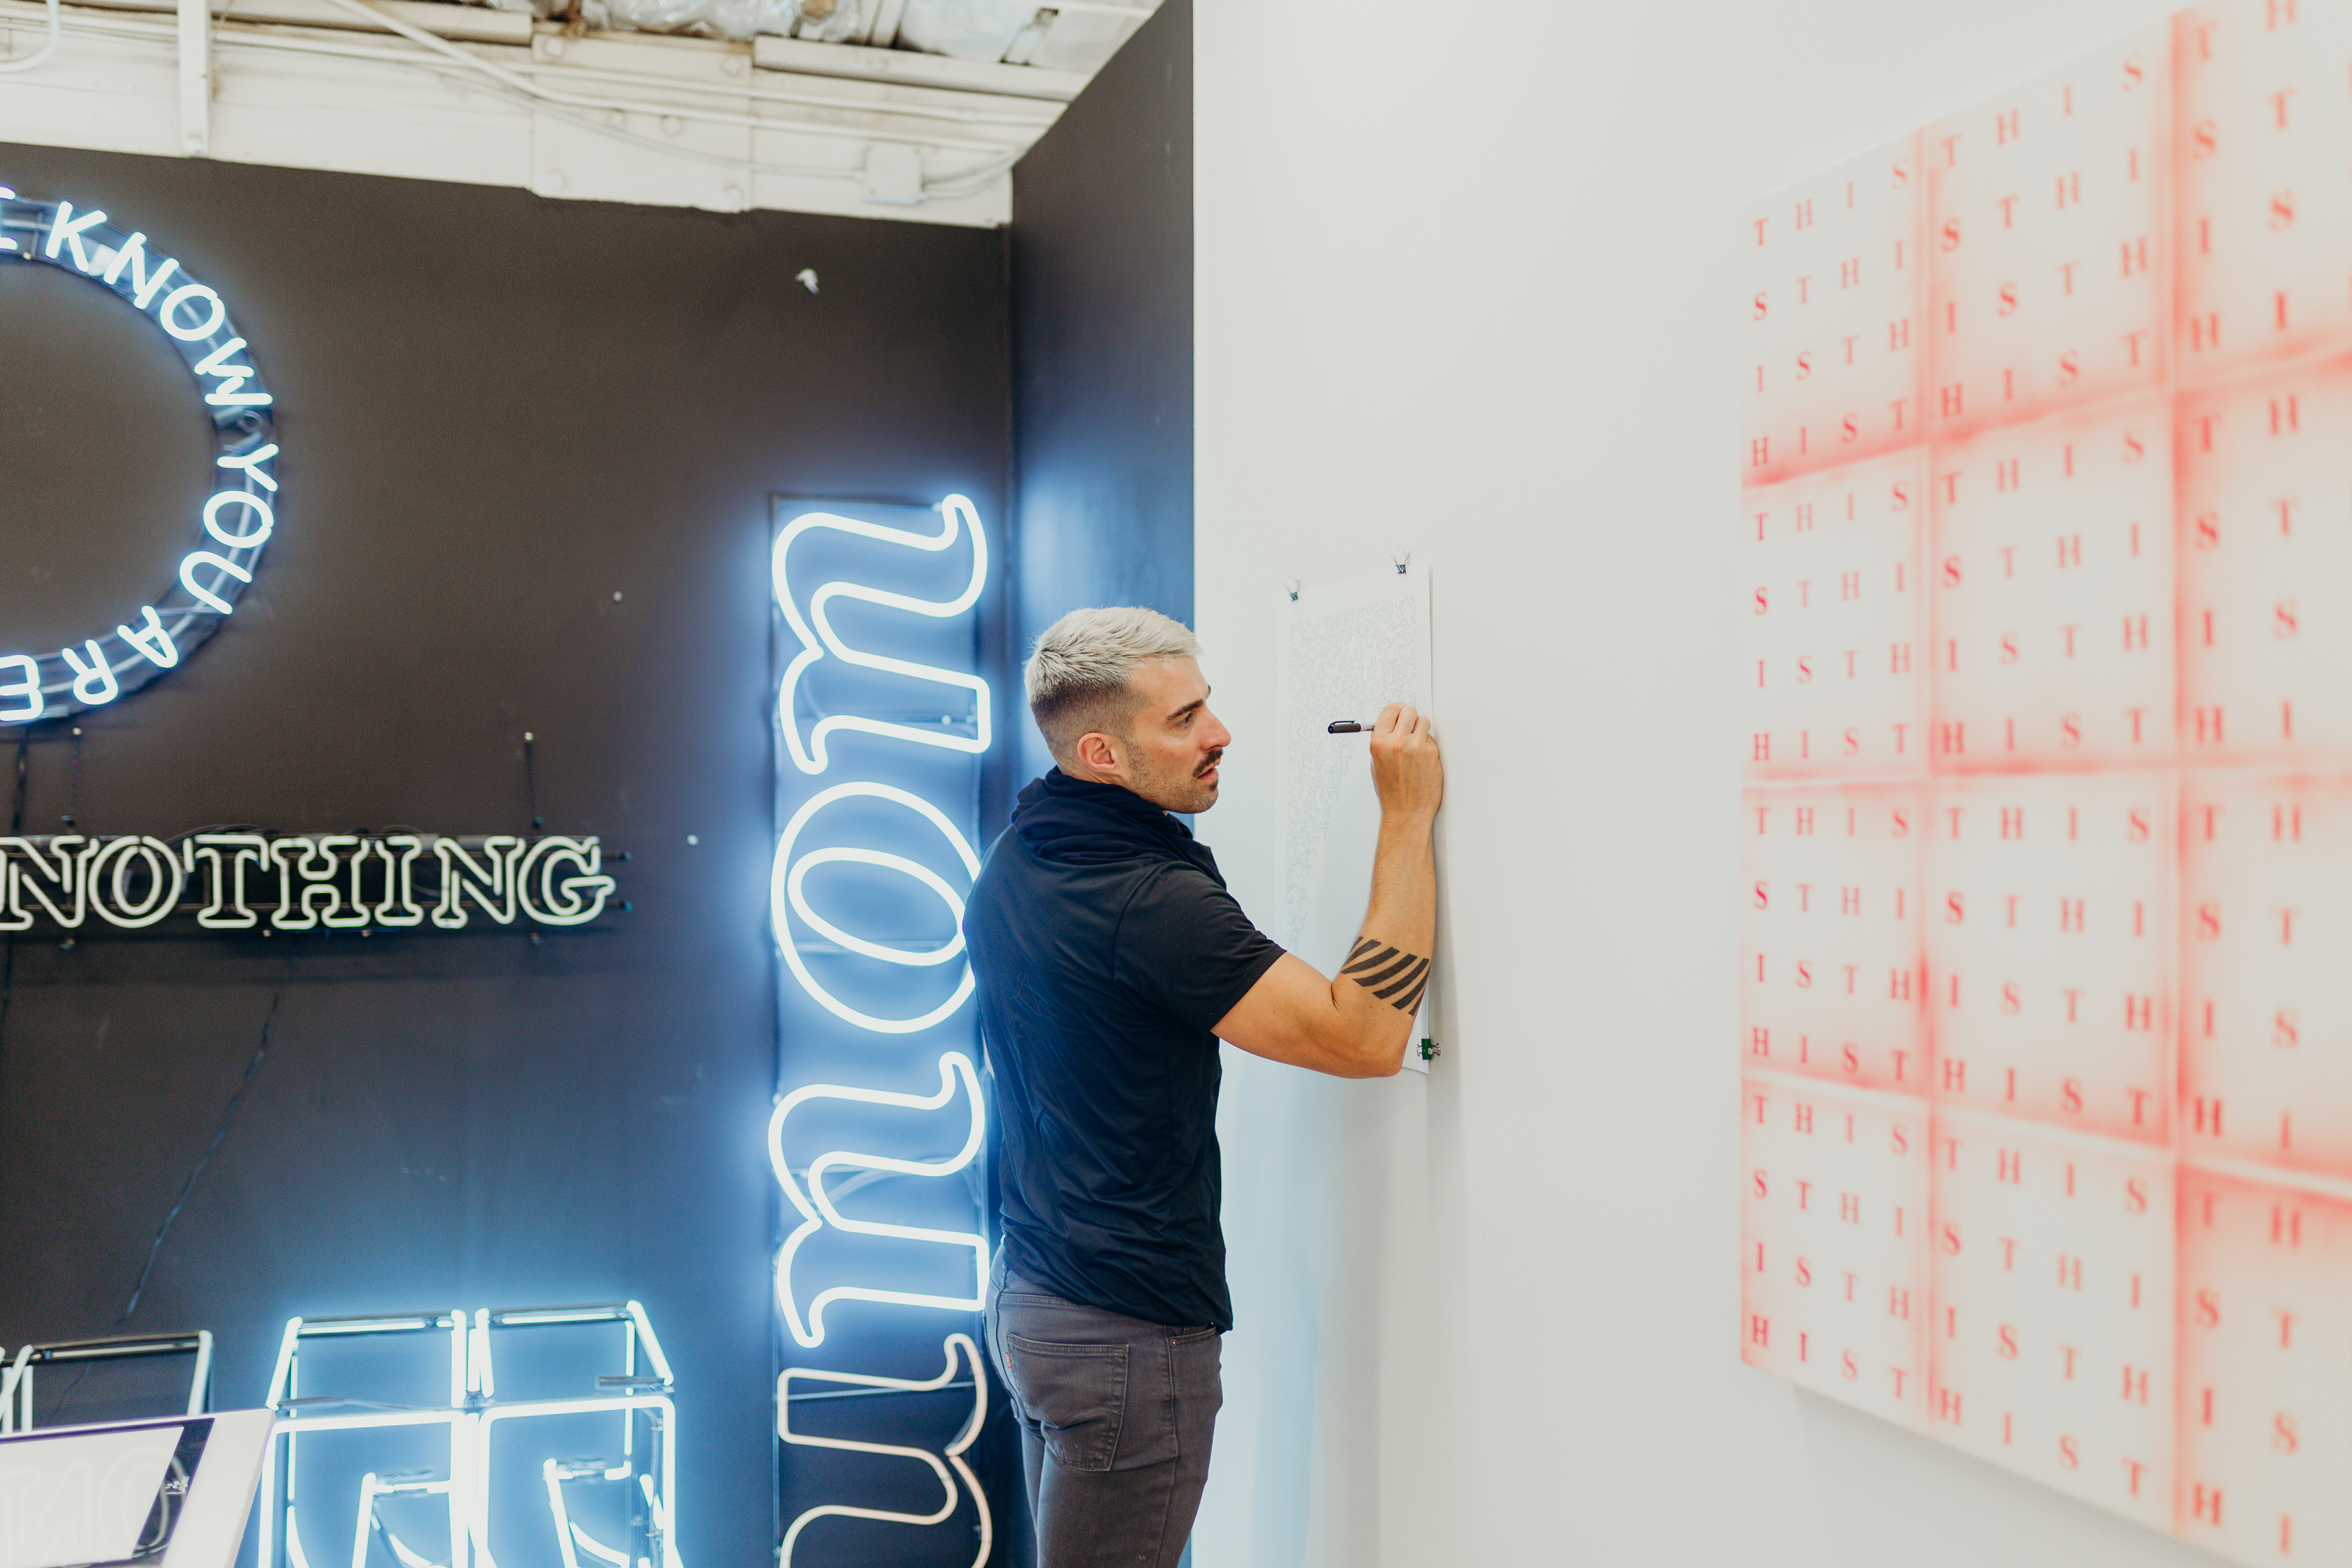 Wide candid shot of joel swanson drawing on a piece of paper hung on the wall. Behind him are several large neon artworks. . 